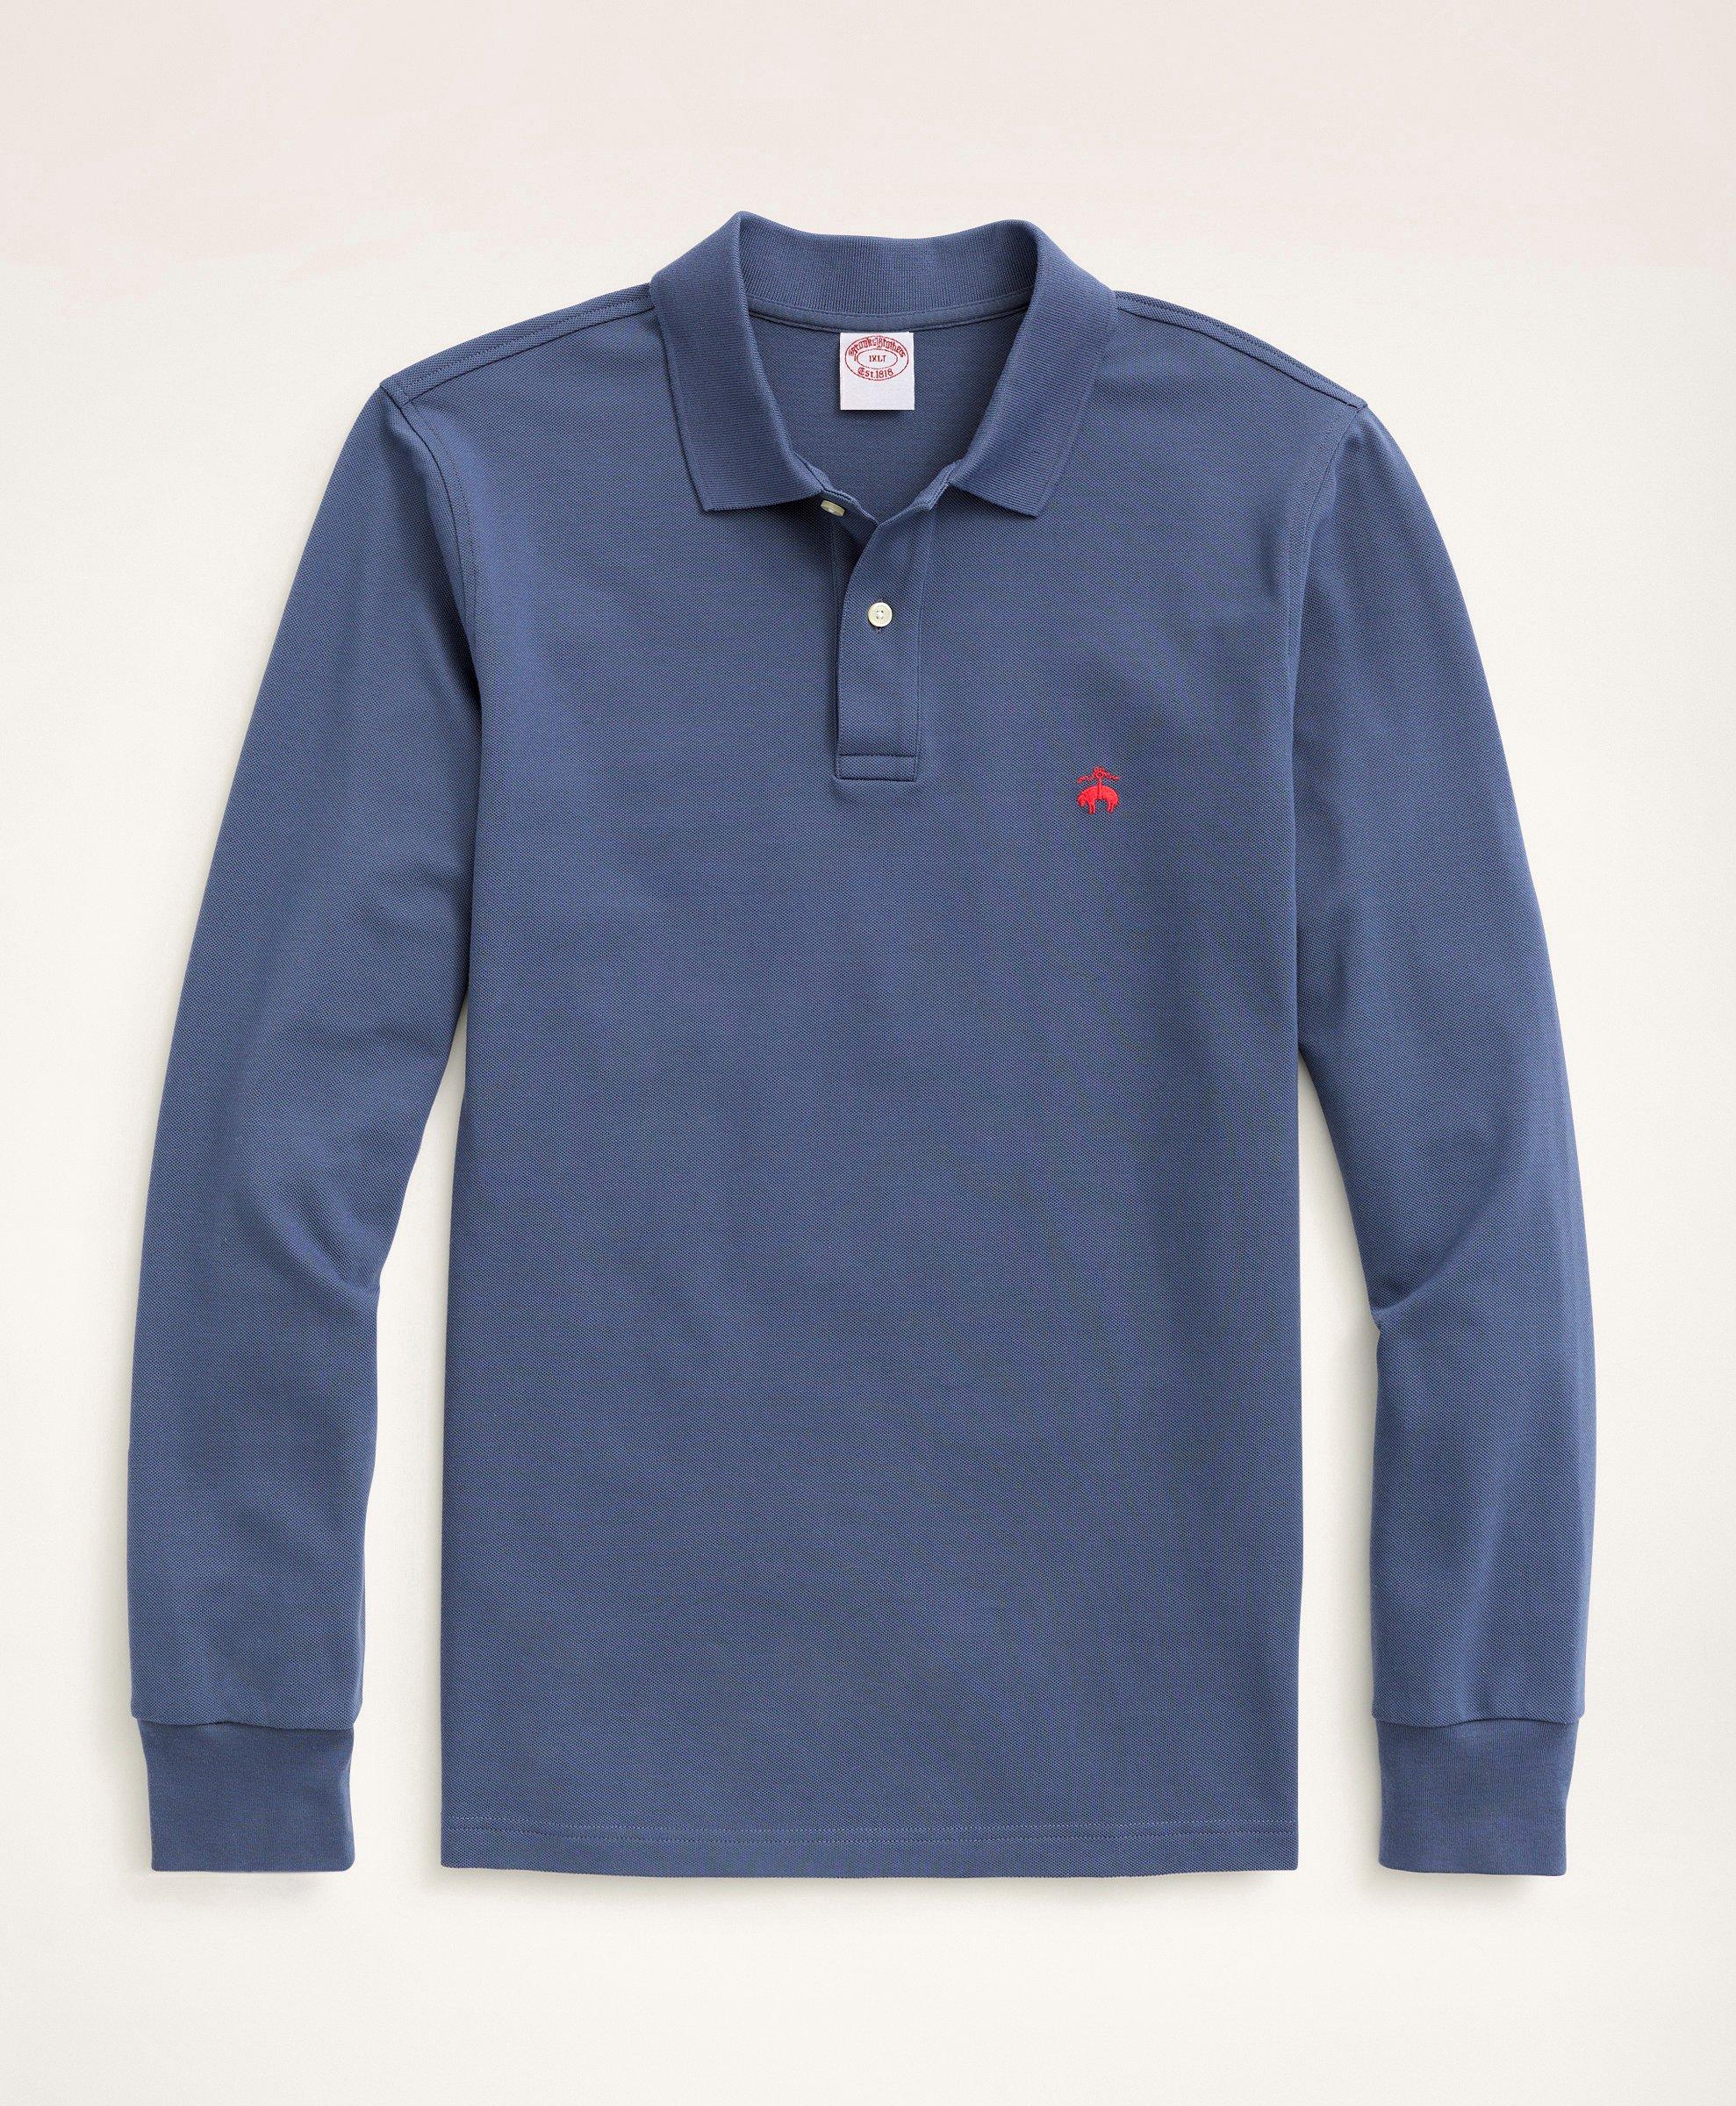 Big & Tall Long-Sleeve Stretch Cotton Polo, image 1